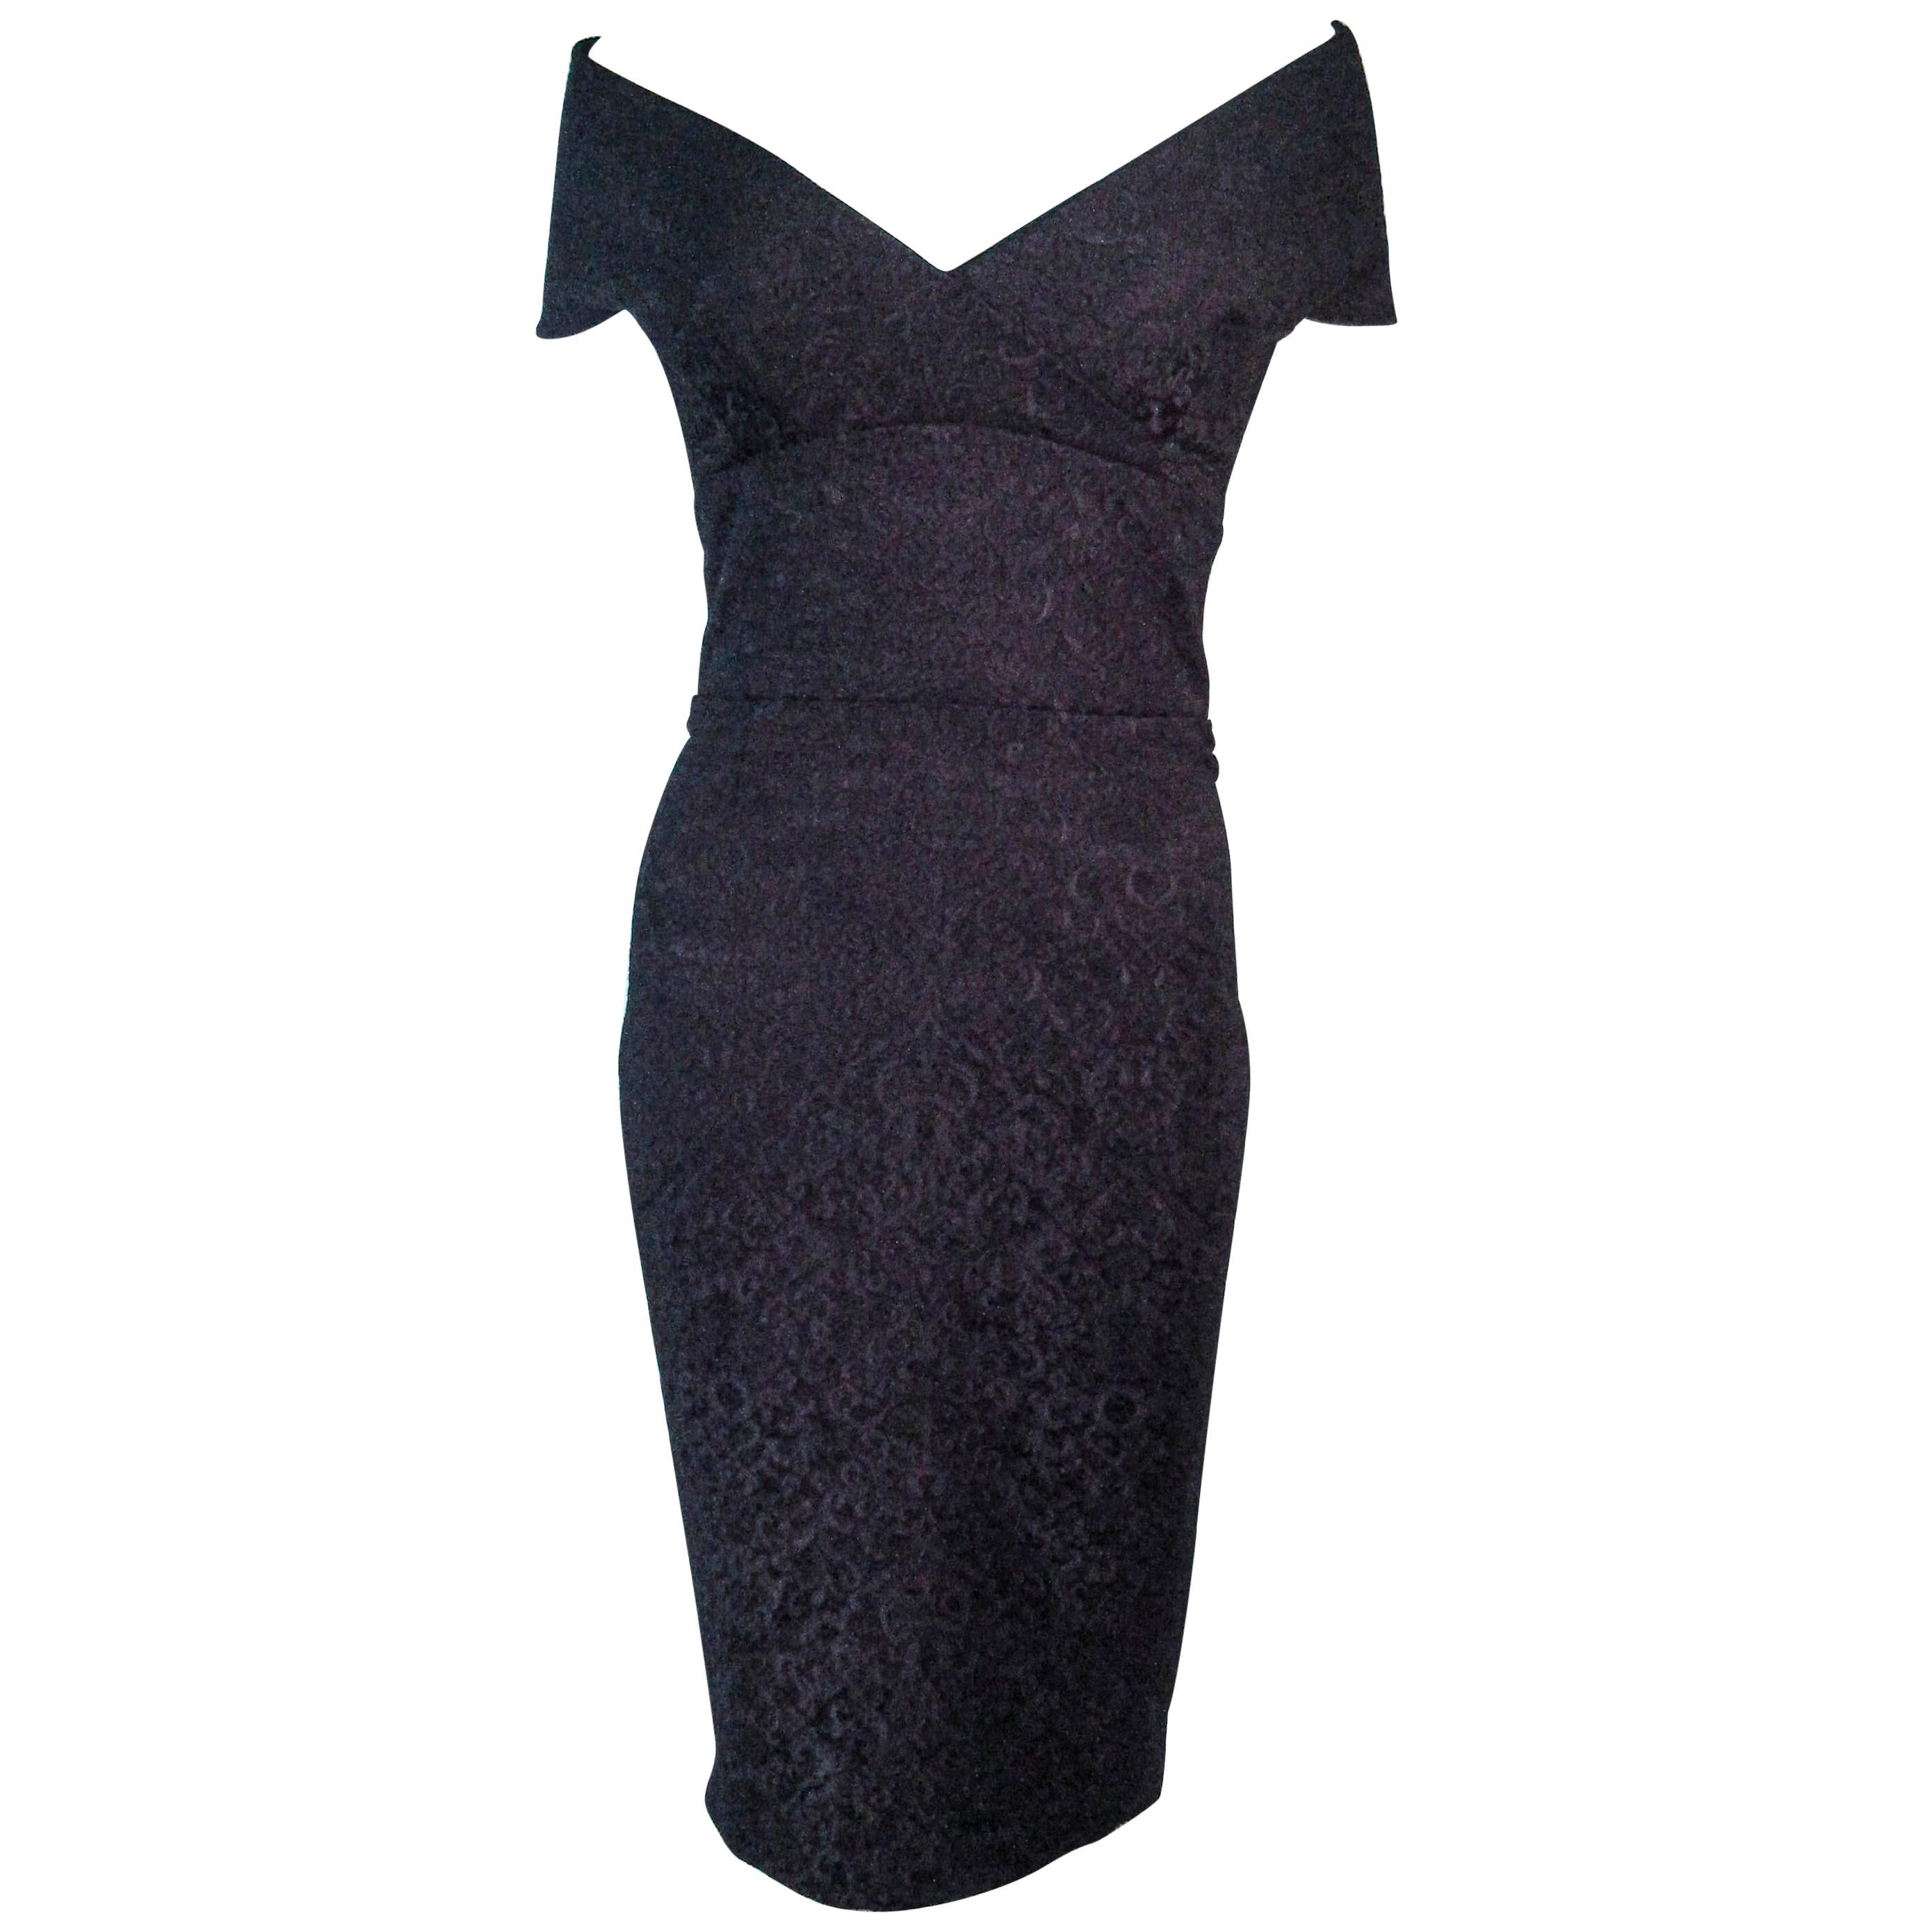 ELIZABETH MASON COUTURE 'MARIA' Black Stretch Lace Cocktail Dress Made to Order For Sale